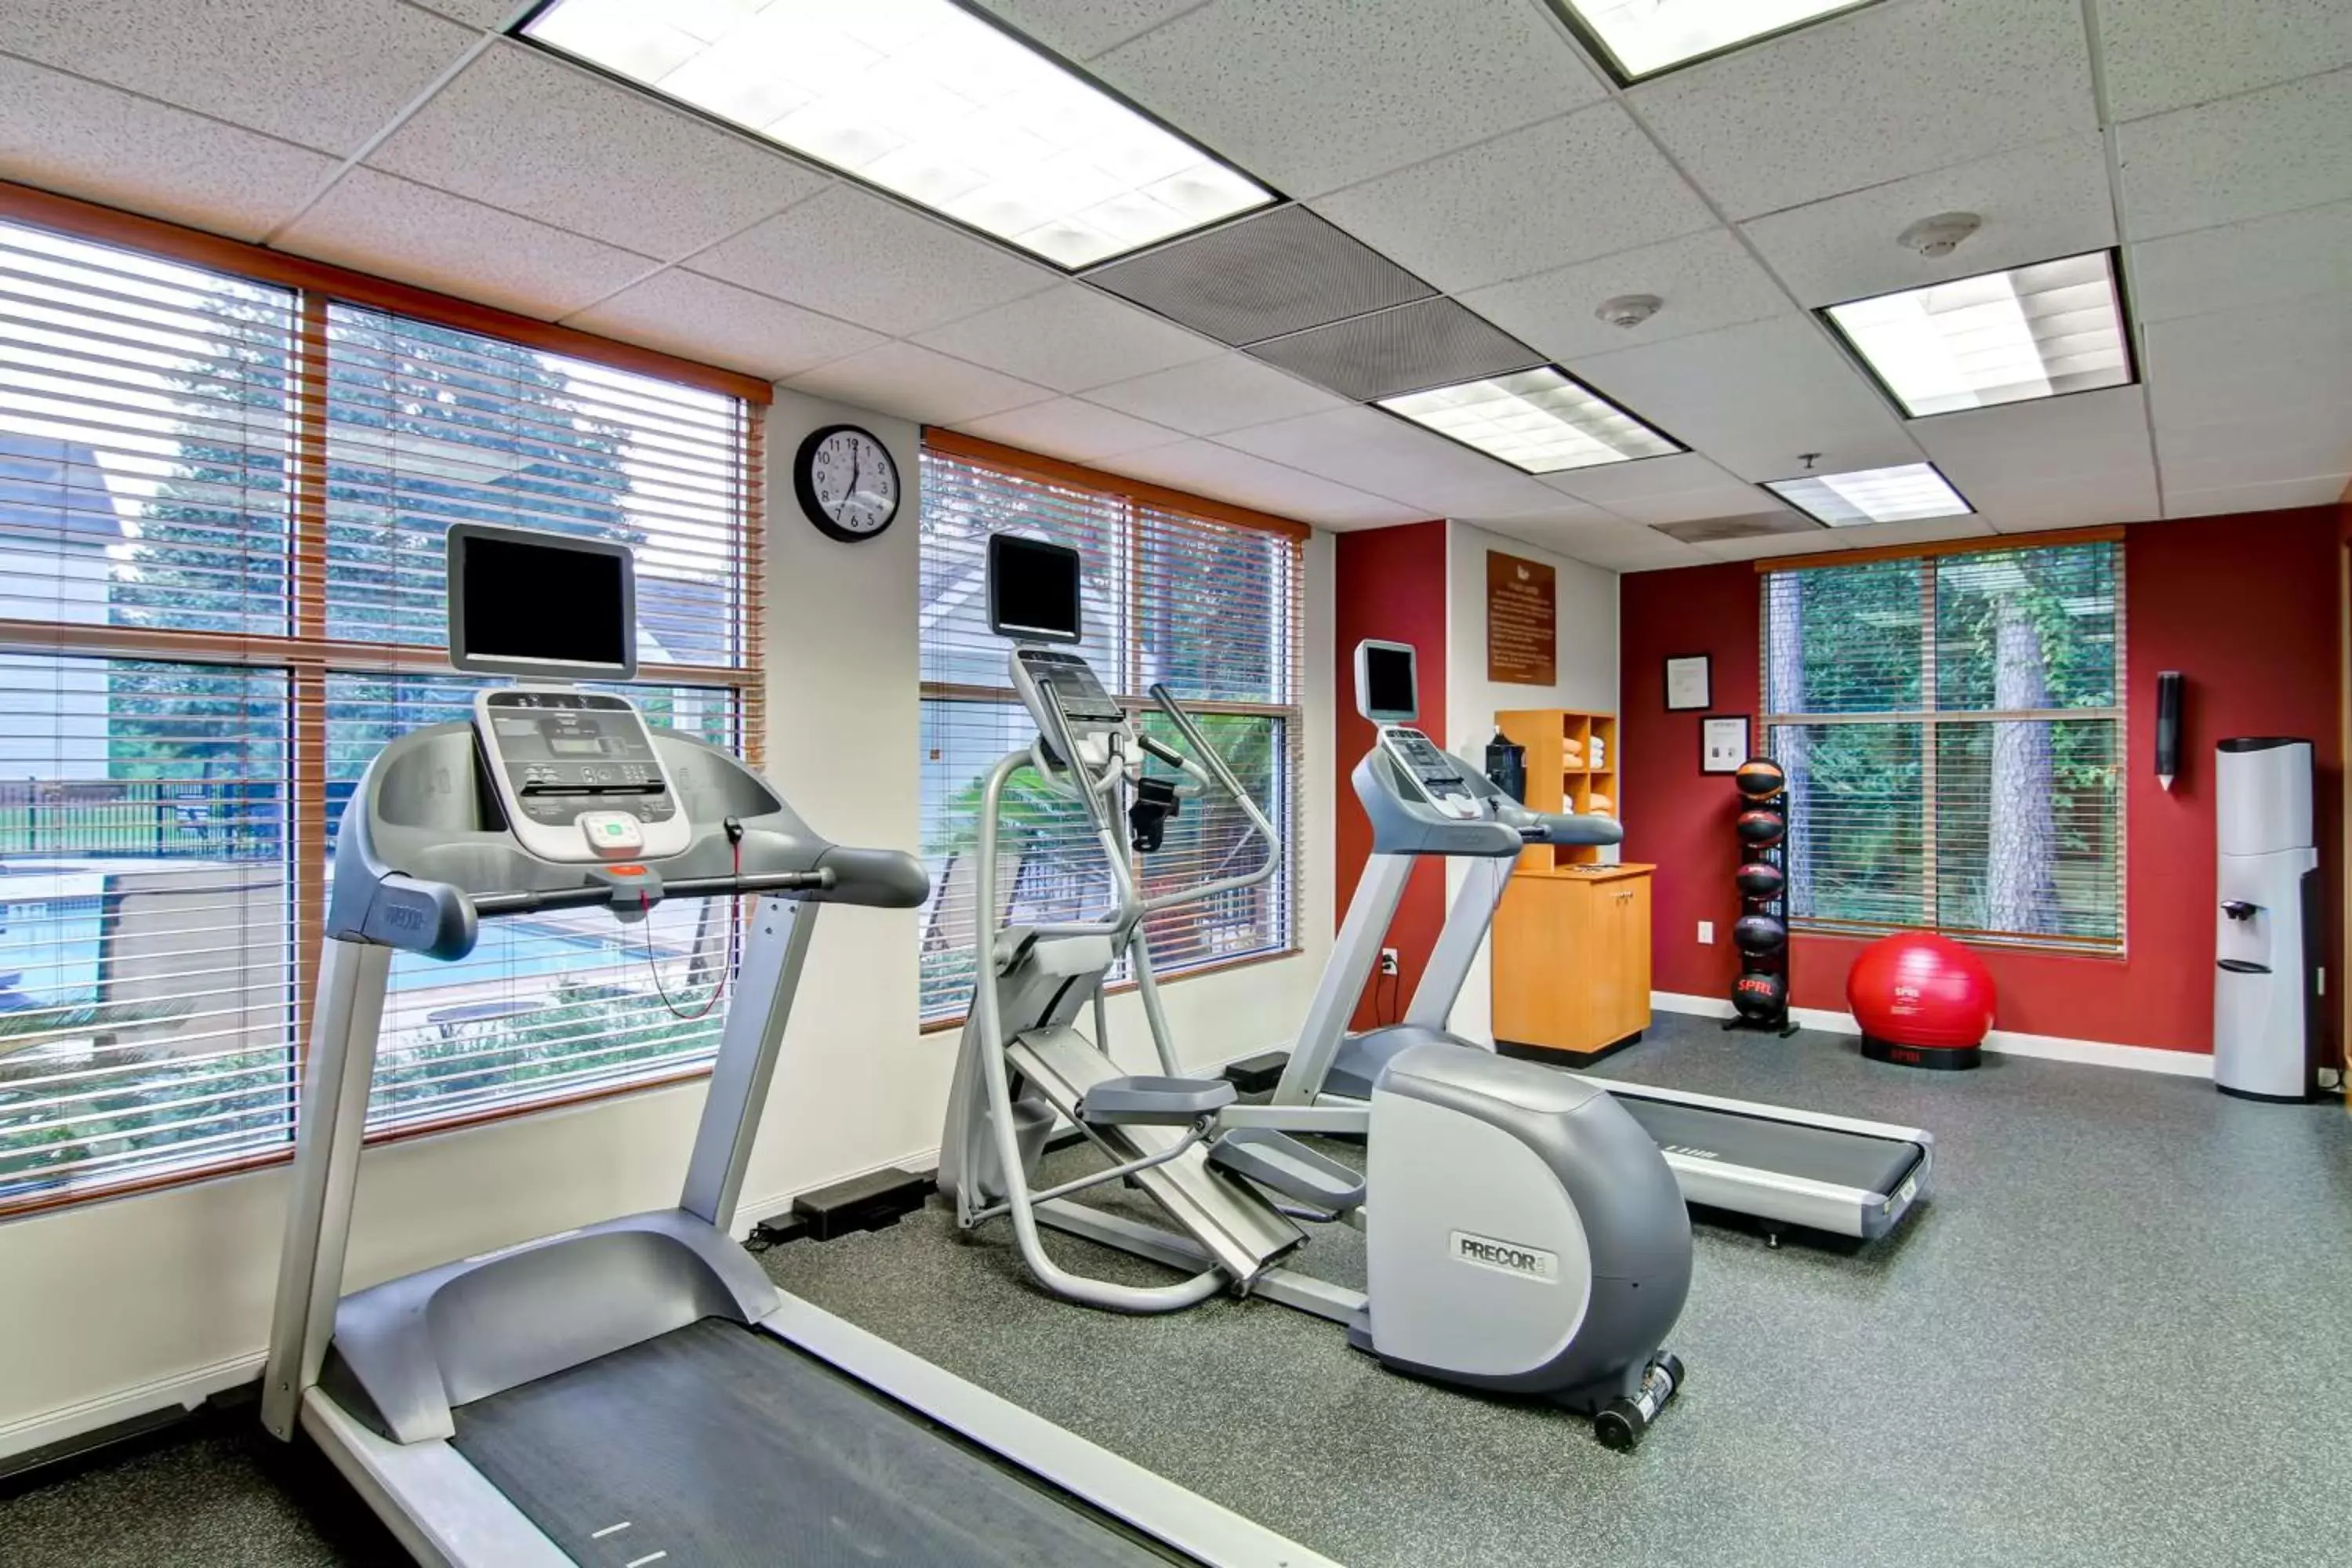 Fitness centre/facilities, Fitness Center/Facilities in Homewood Suites Houston Kingwood Parc Airport Area